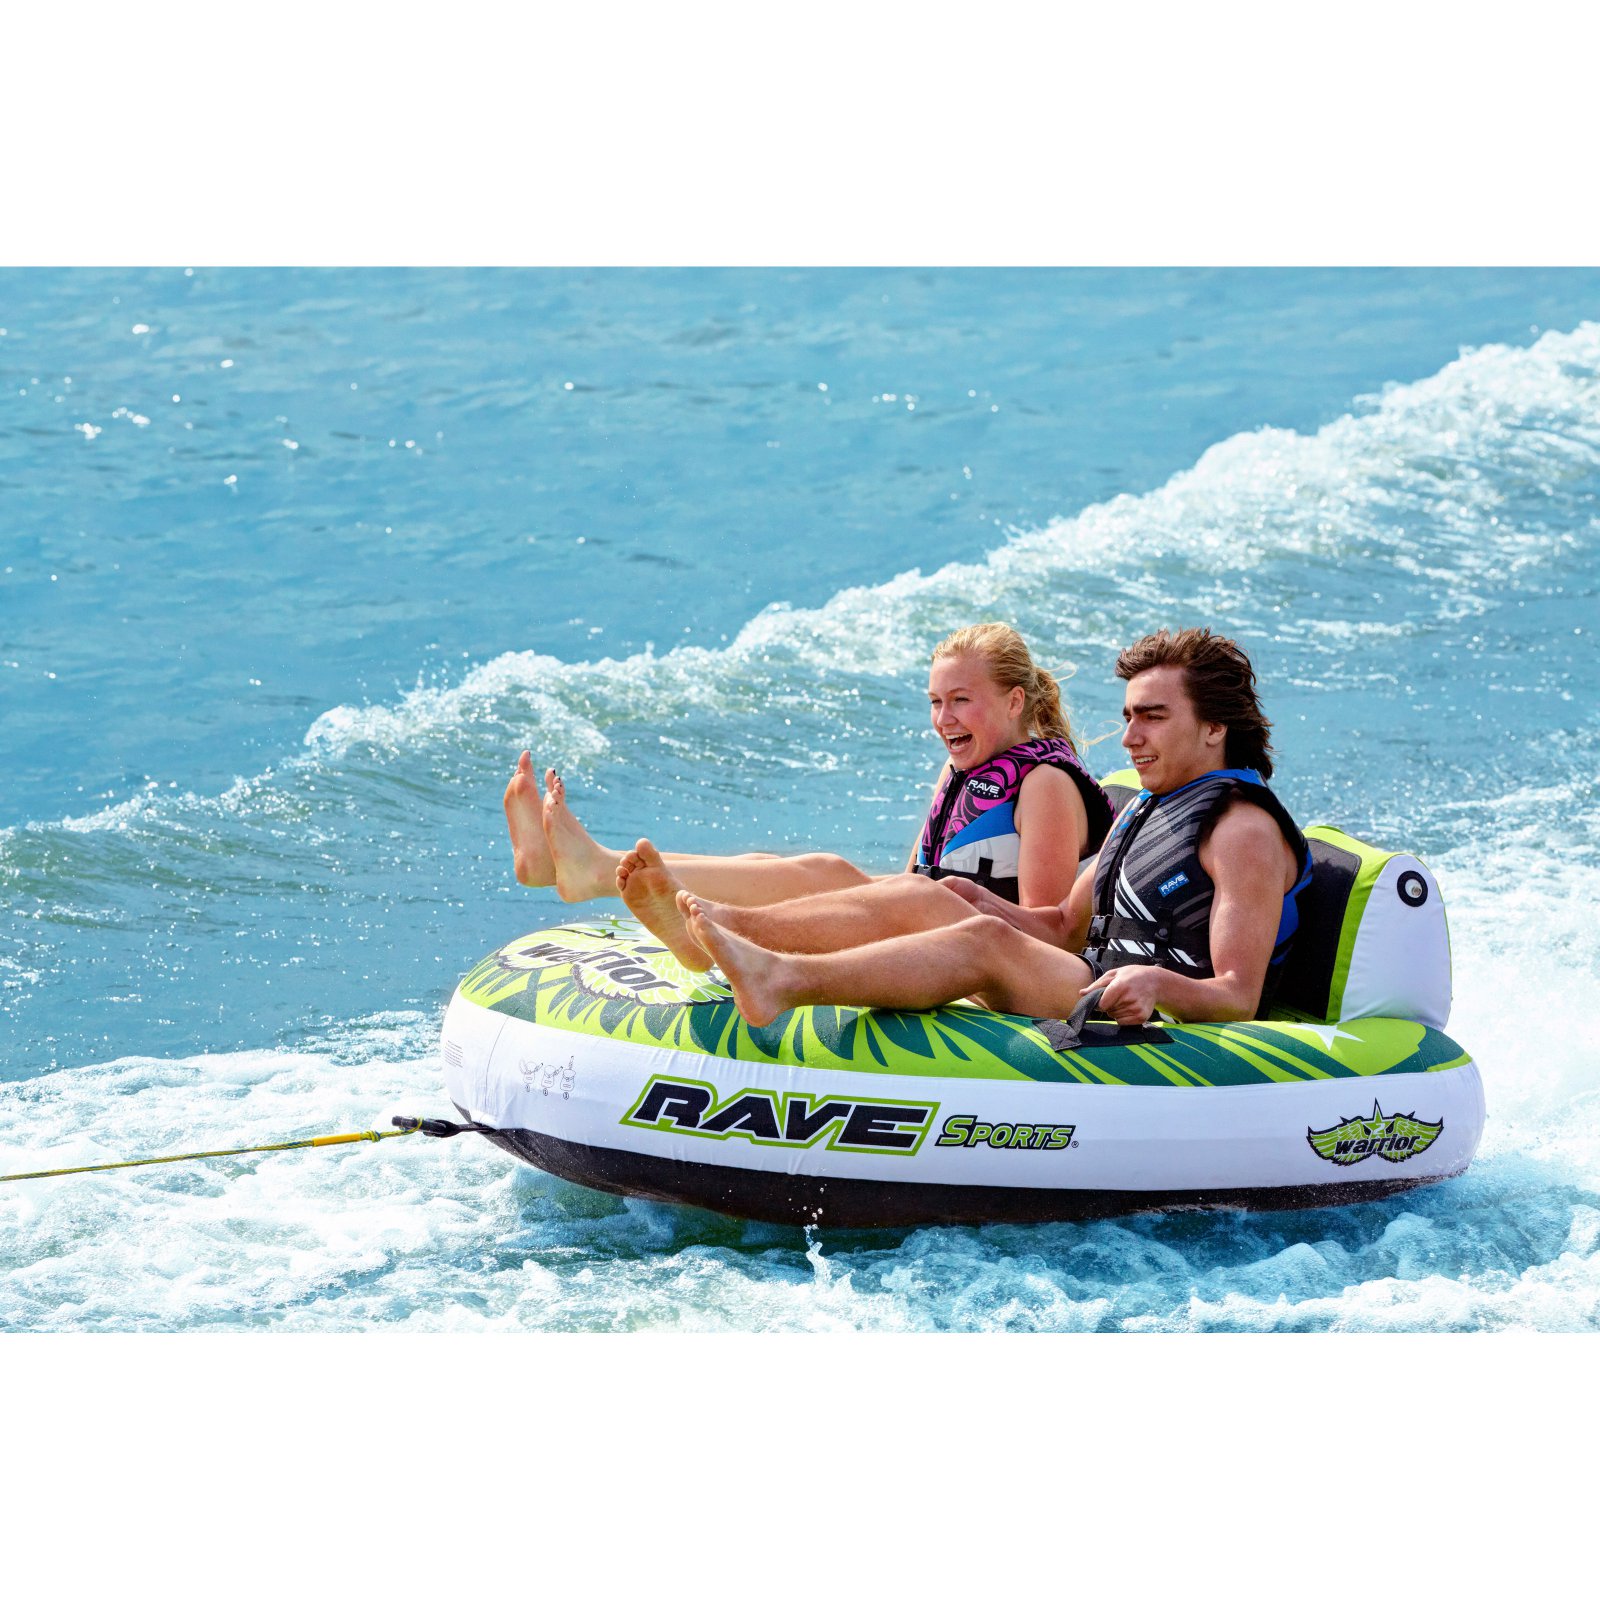 RAVE Sports Warrior II Double Seat Inflatable Towable Tube, Green - image 3 of 3